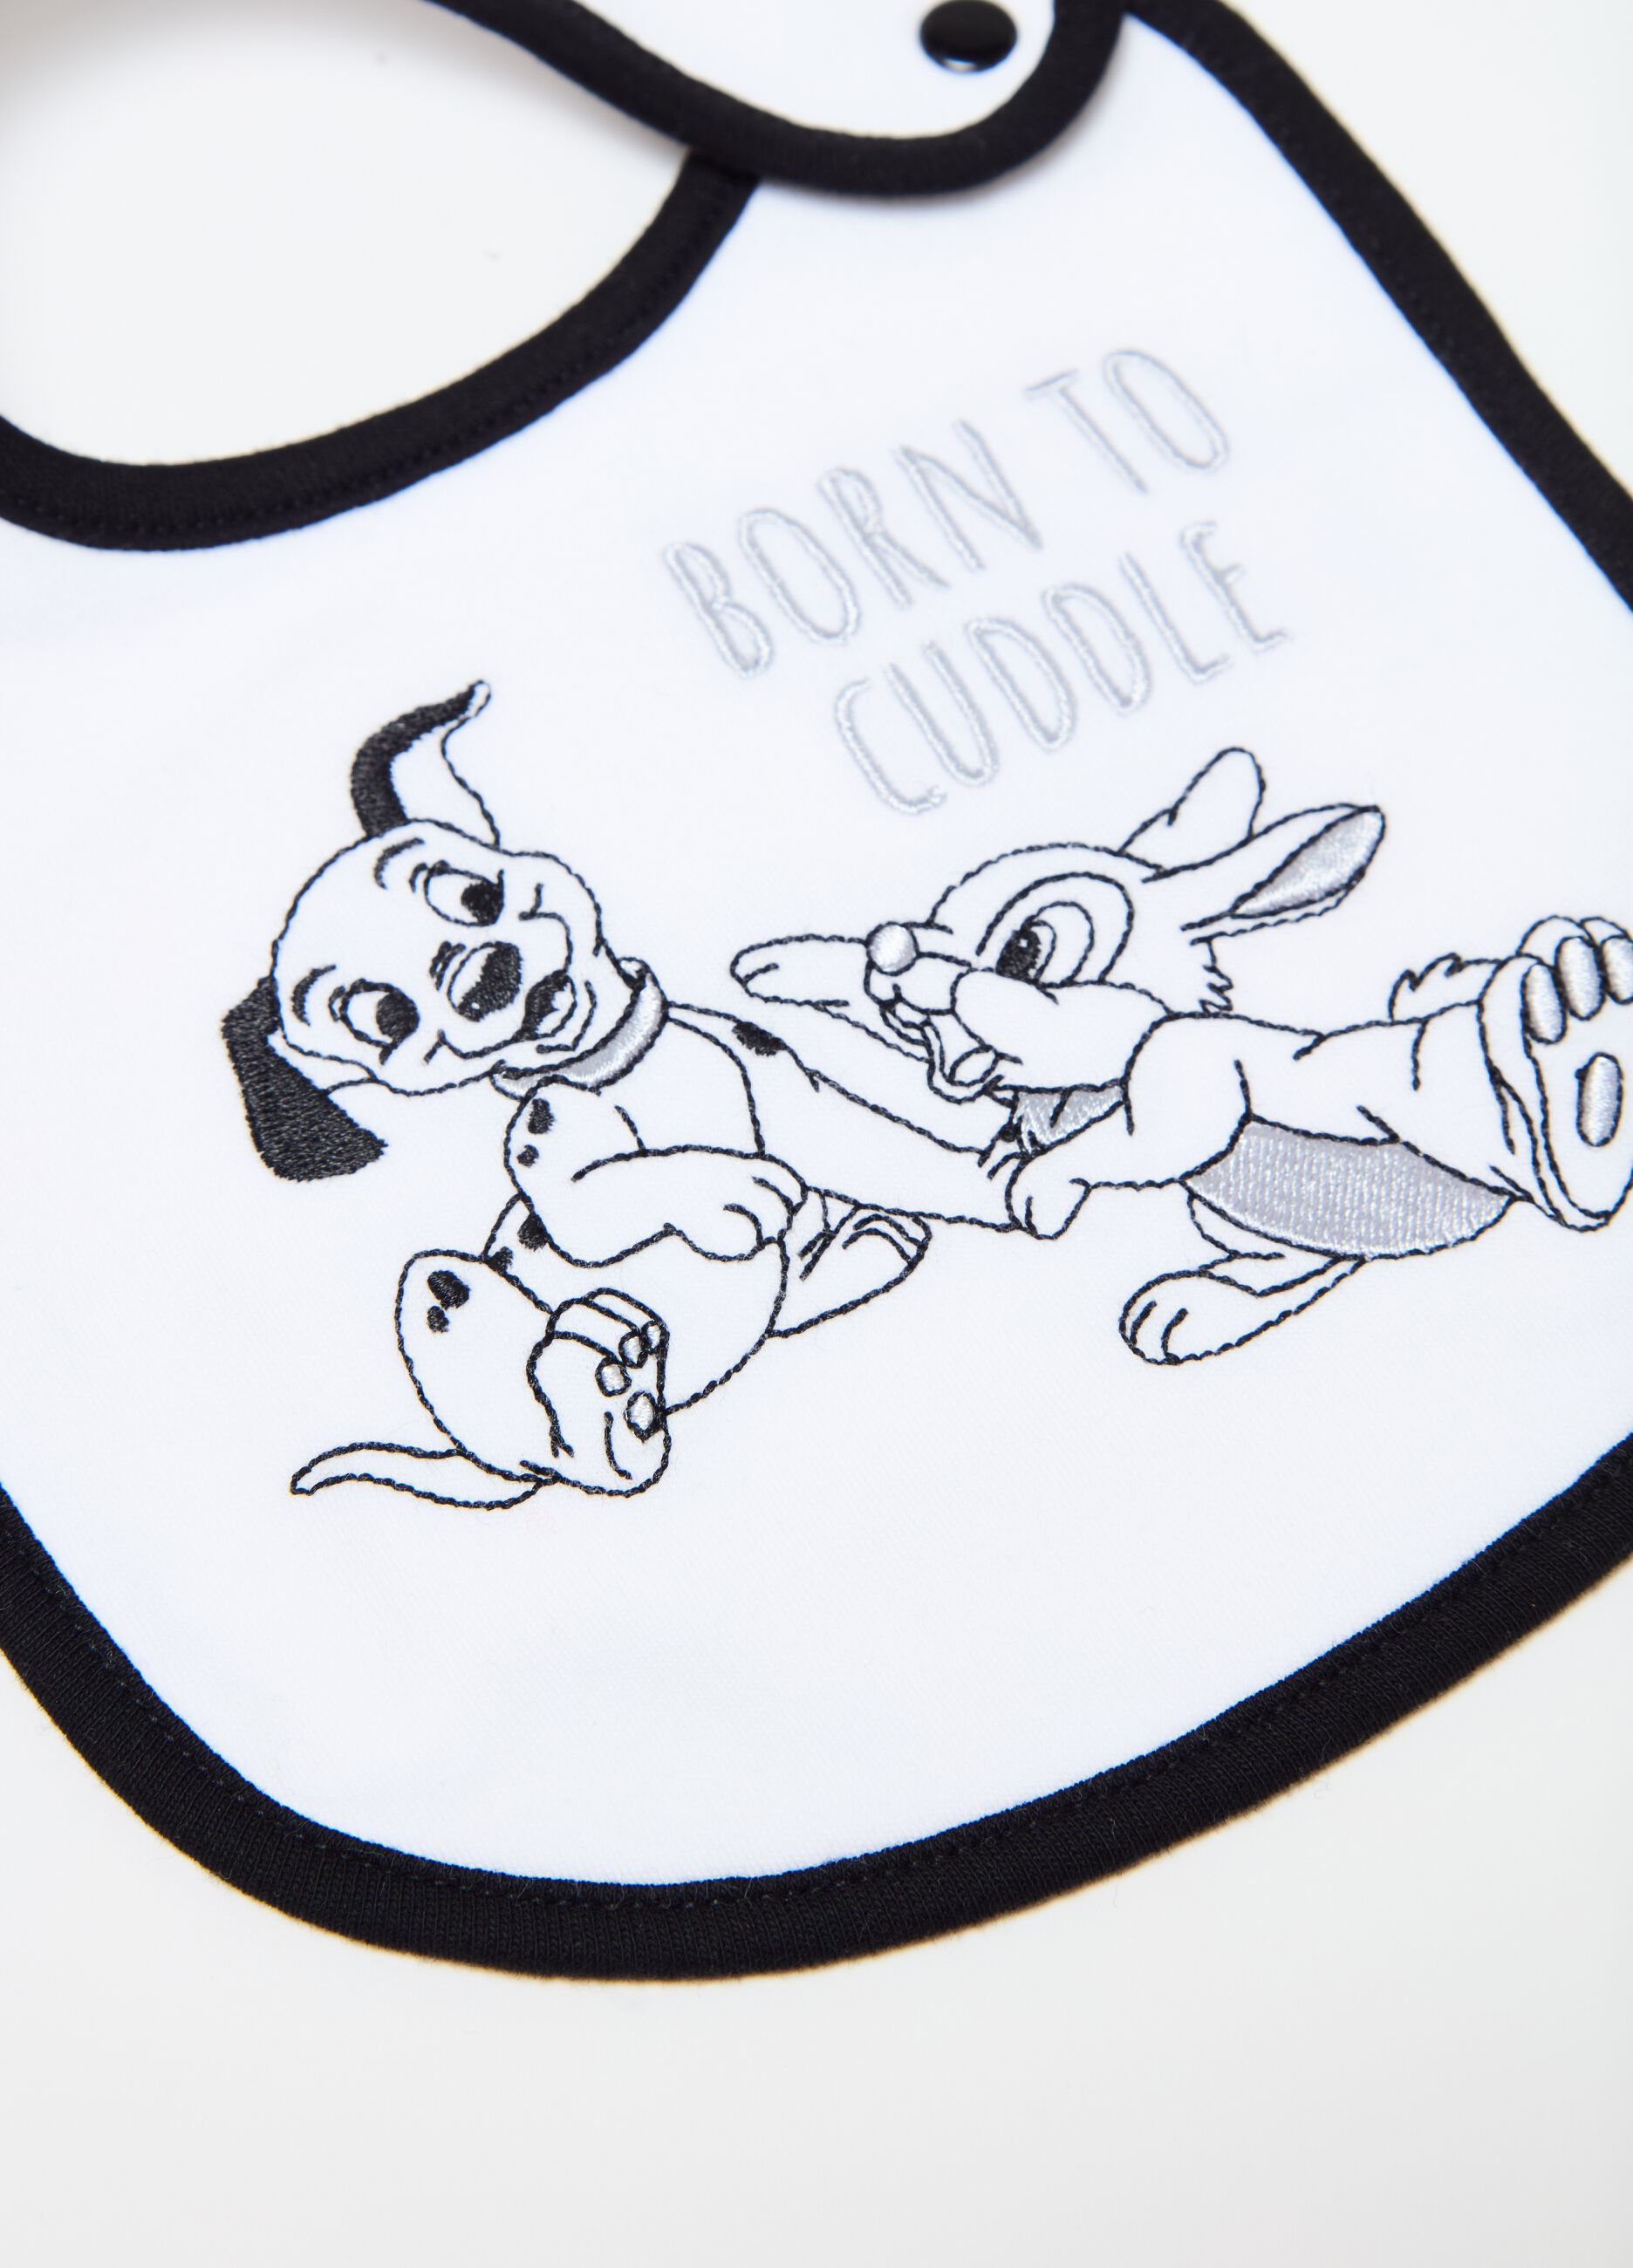 Bib with Thumper and Lucky embroidery